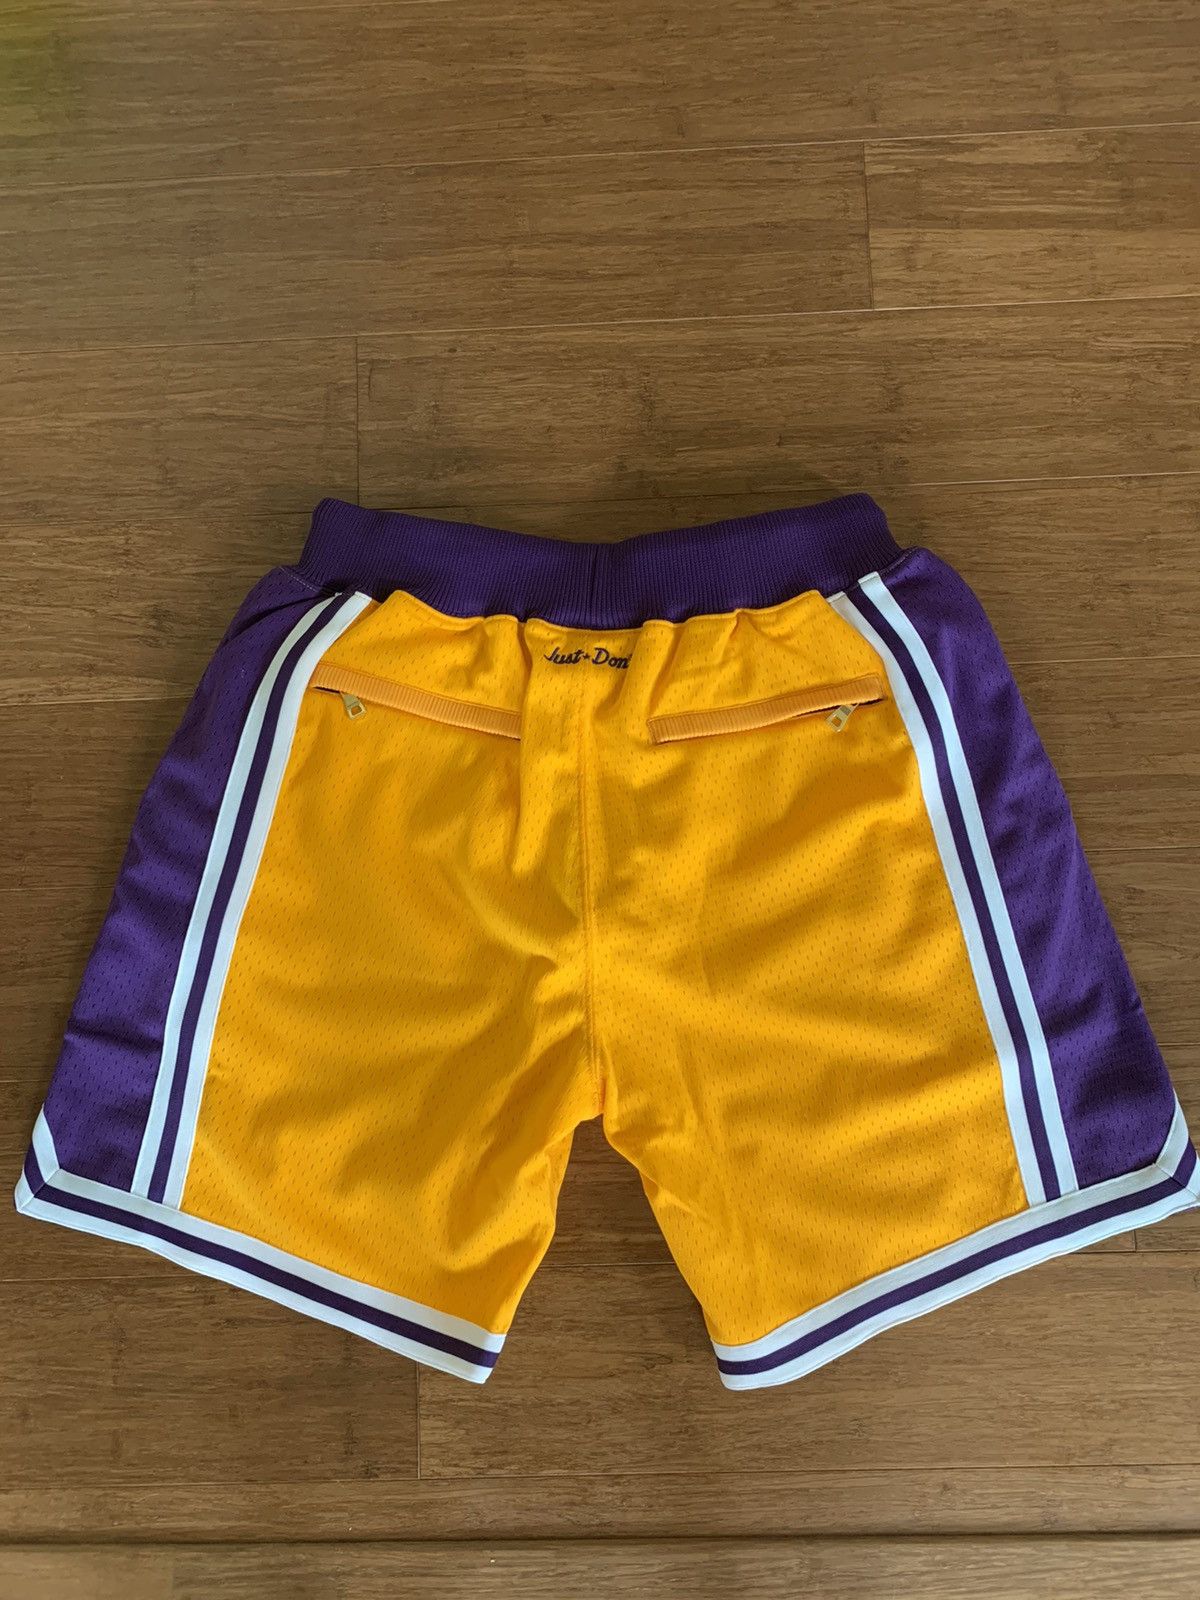 Mitchell & Ness JUST DON LOS ANGELES LAKERS 1996-97 HOME SHORTS Size US 34 / EU 50 - 2 Preview